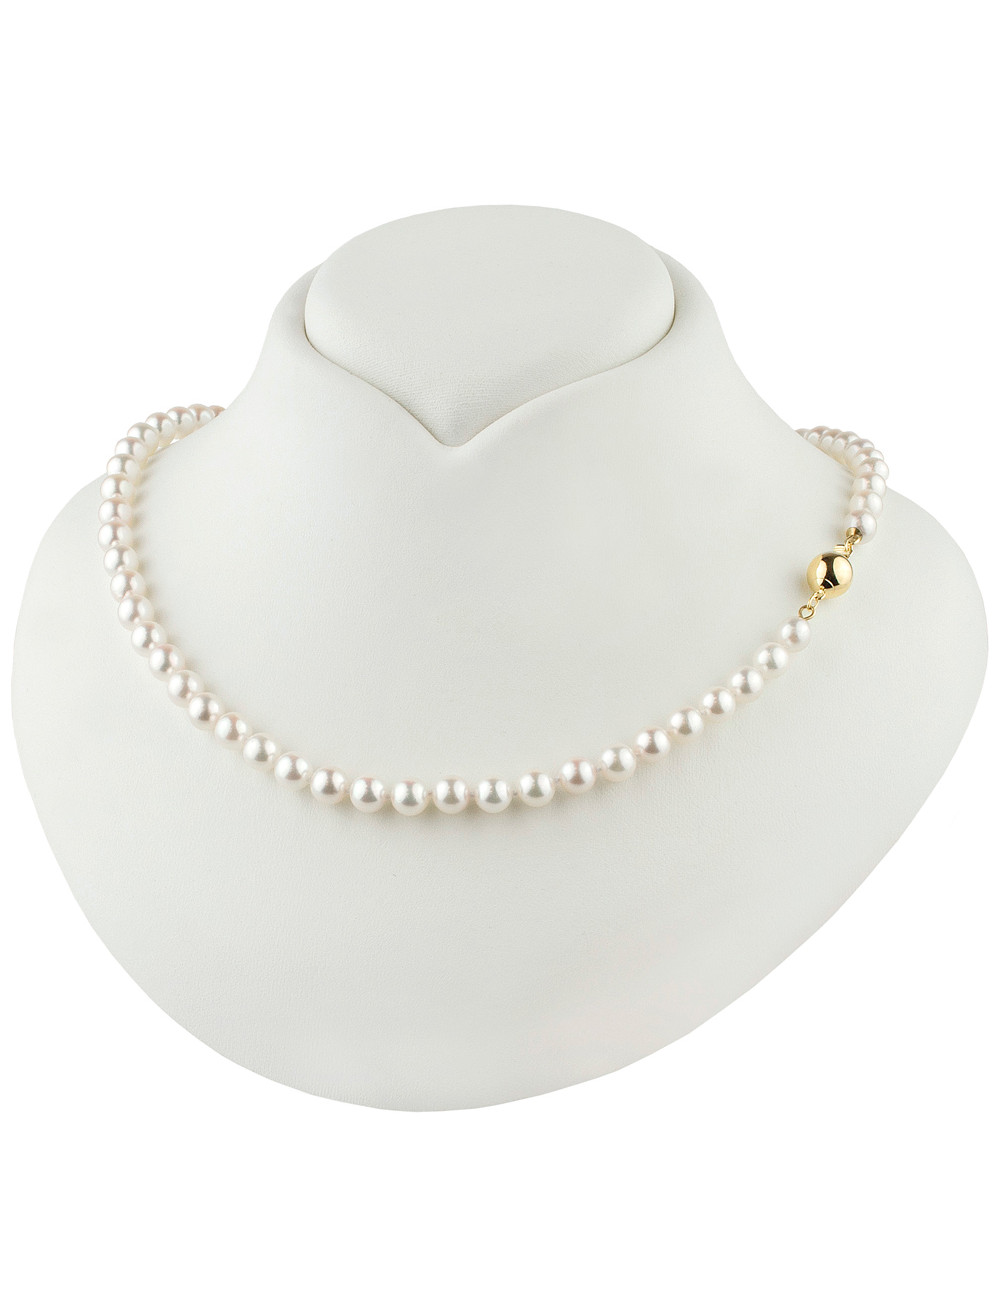 Elegant white Akoya pearl necklace with gold ball clasp Nm6065G2